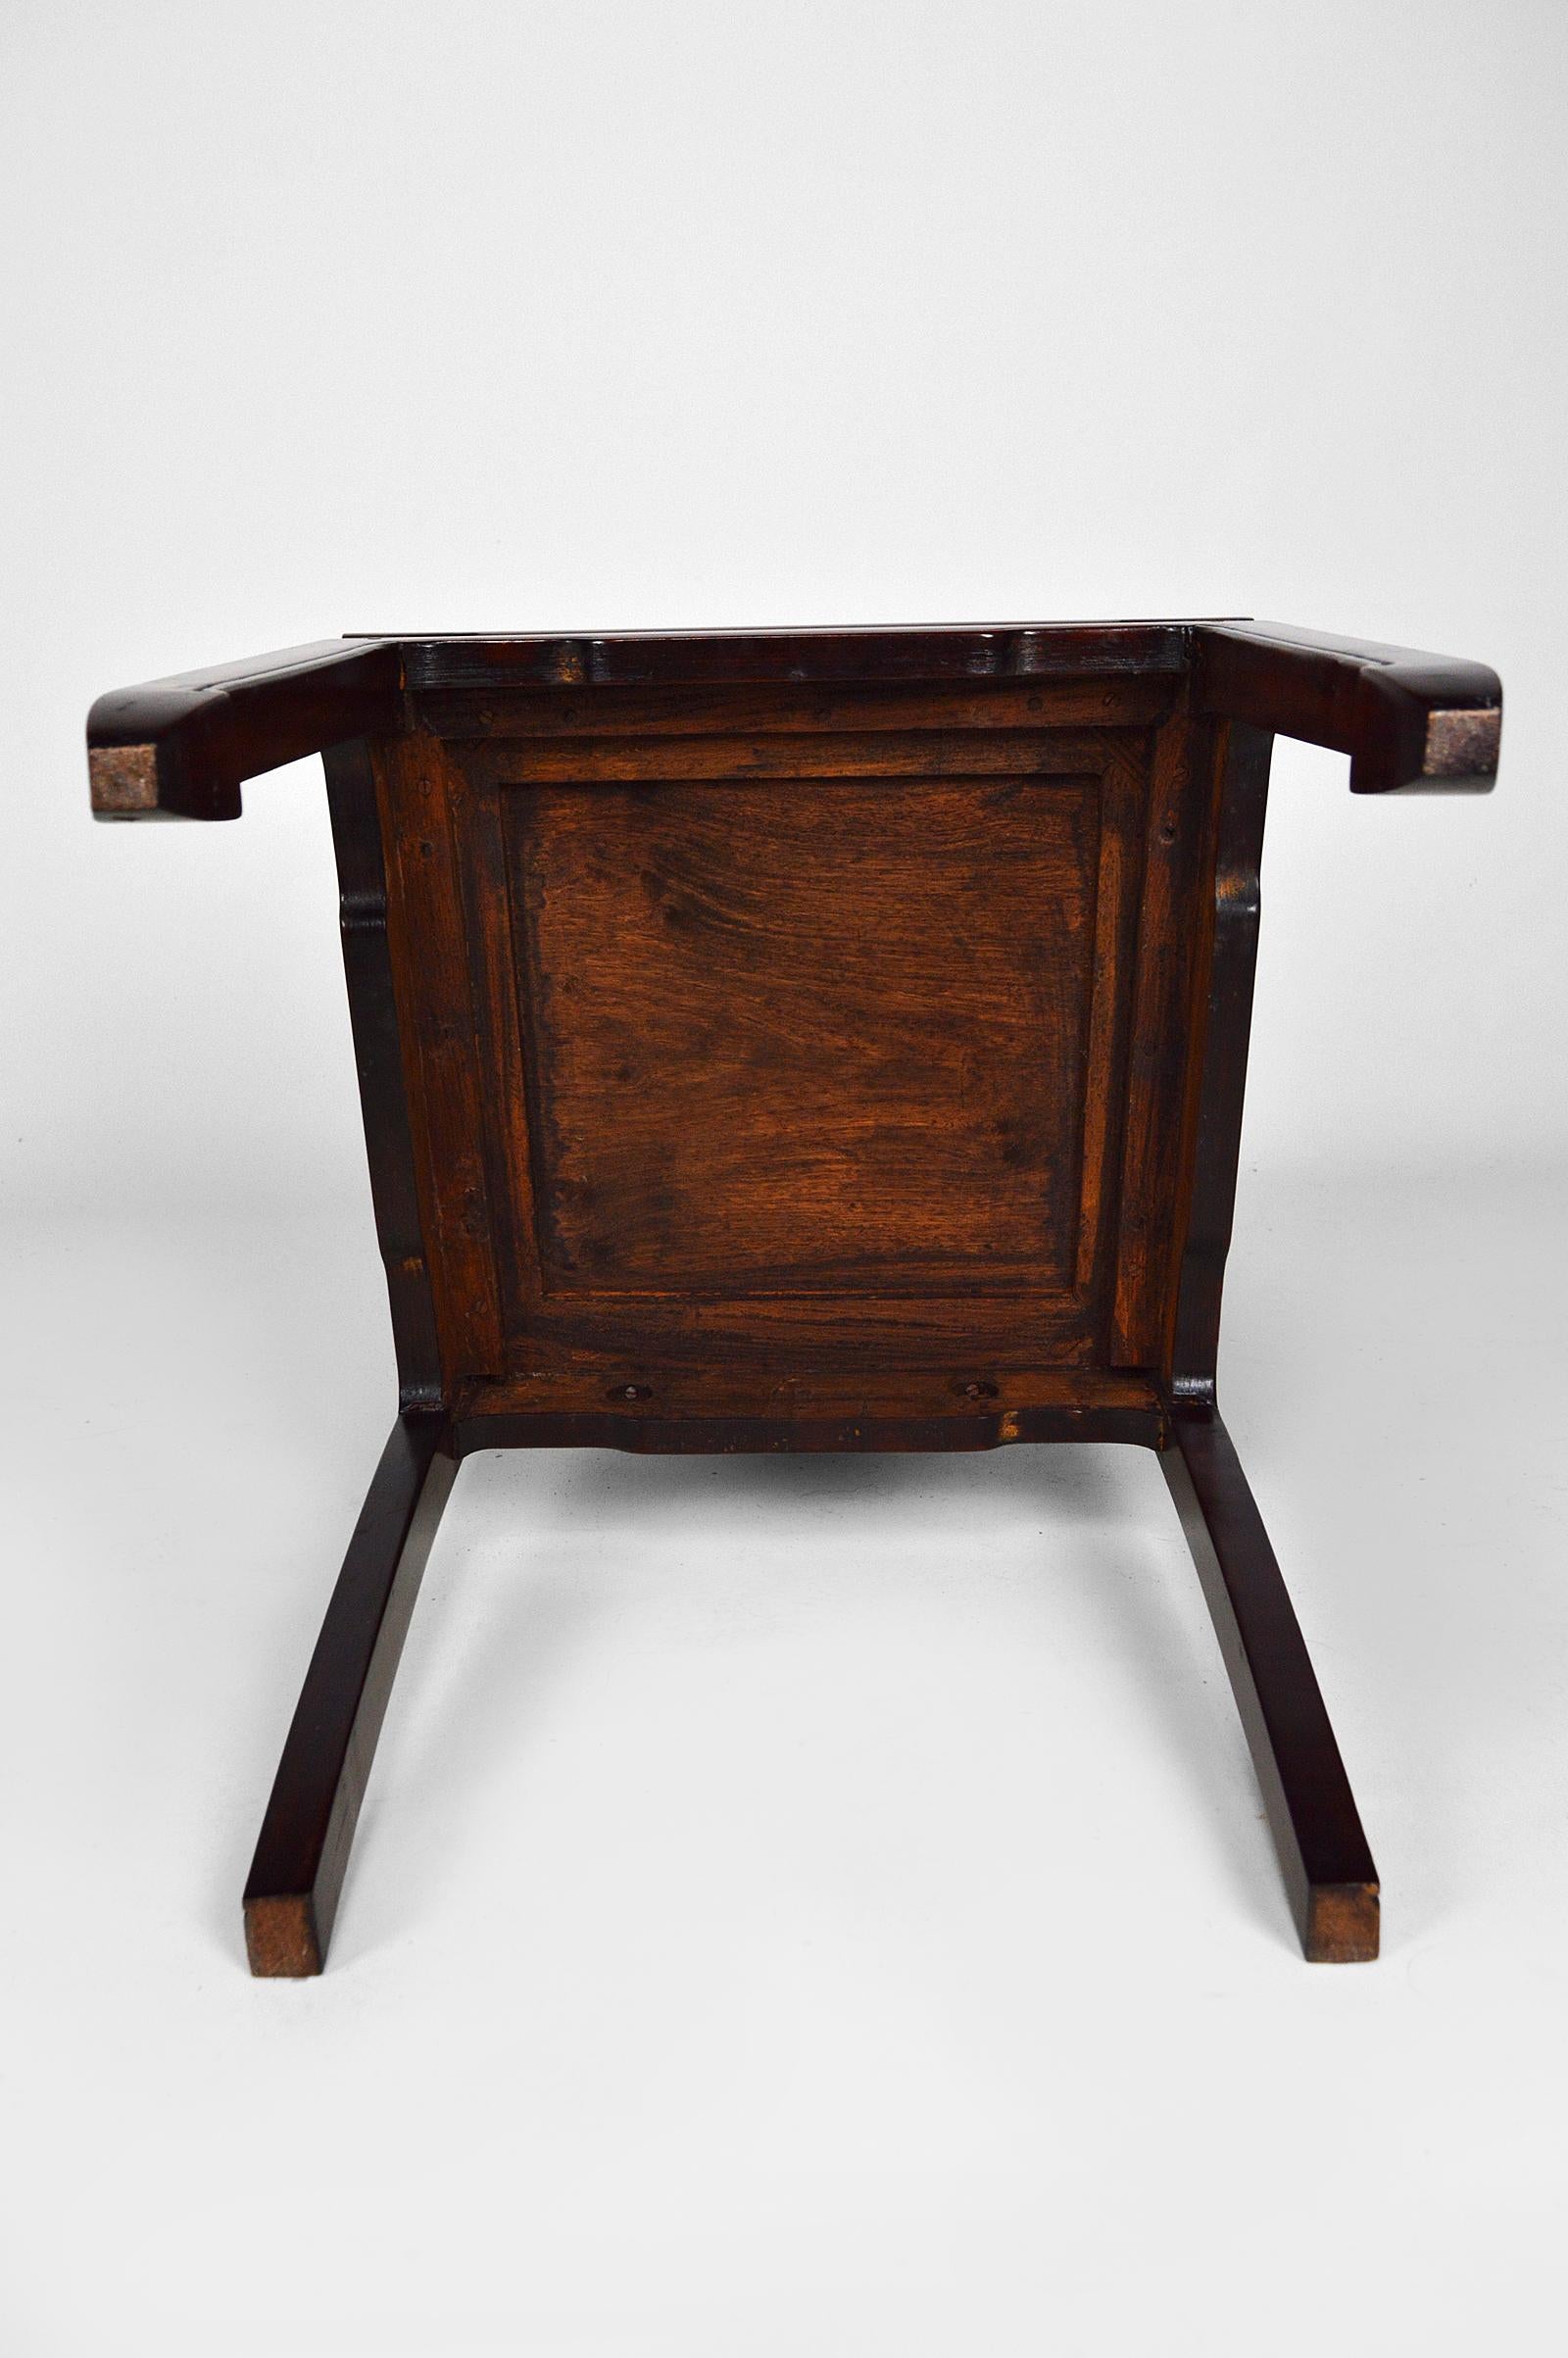 Set of 5 Asian Inlaid Wooden Chairs, Mid-20th Century 7